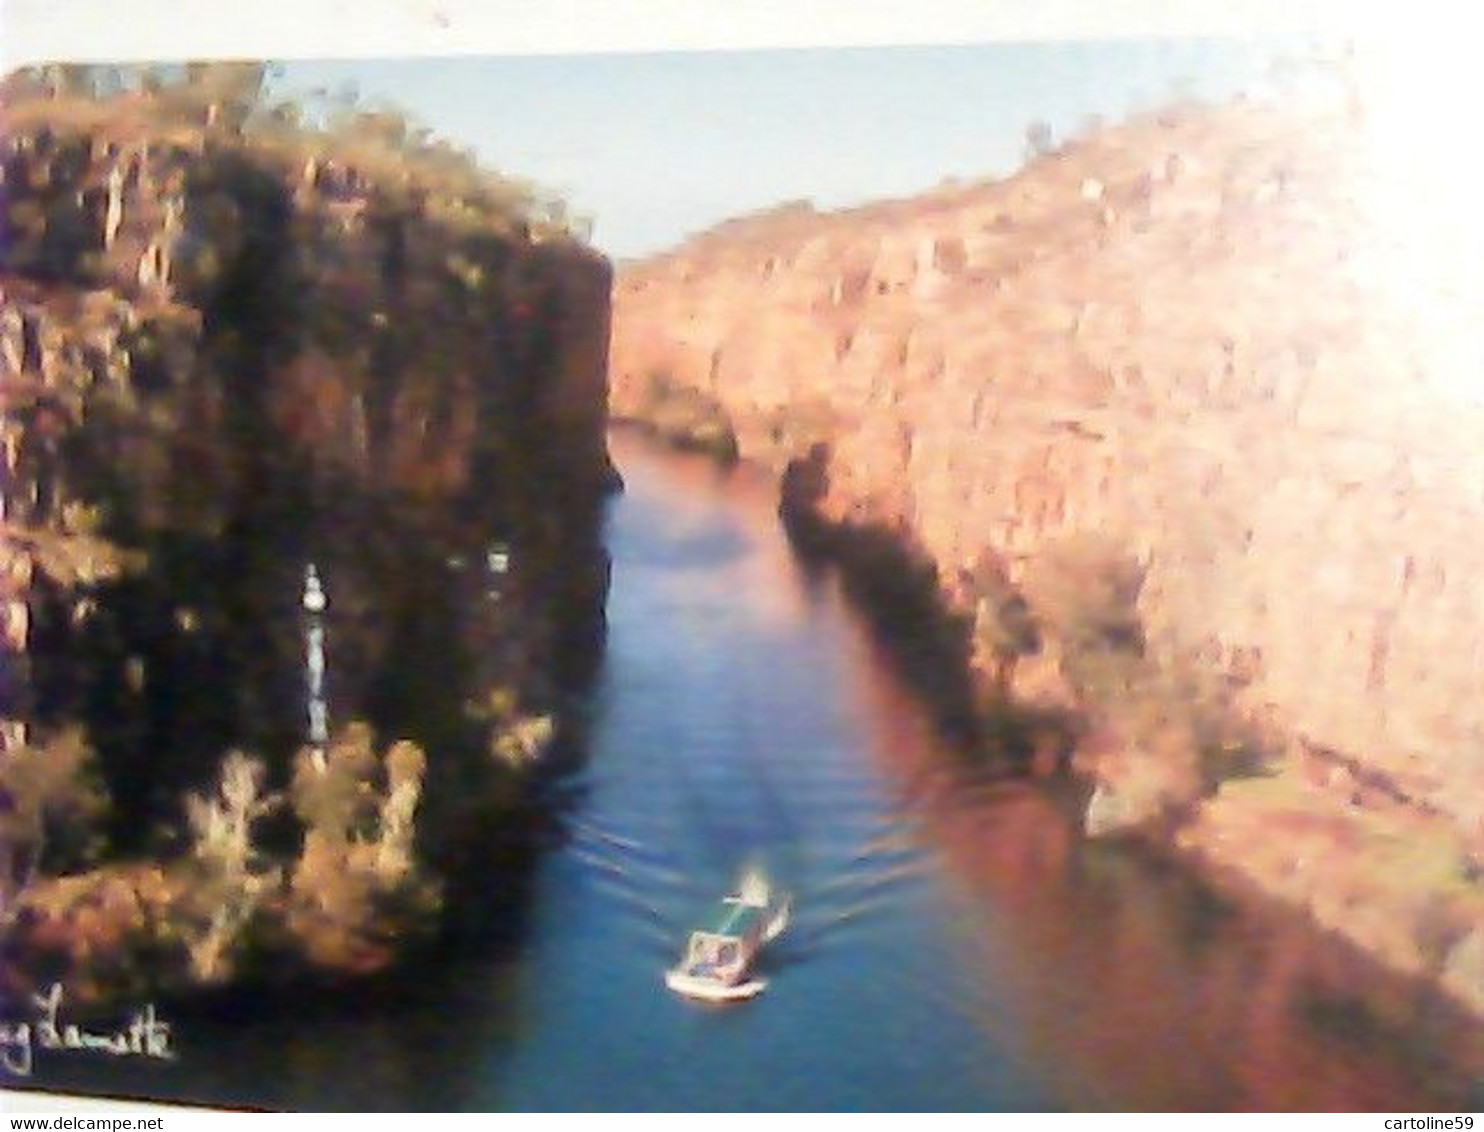 AUSTRALIA - Northern Territory - Katherine - Katherine Gorge VB2004  STAMP TIMBRE SELLO 1$  MT ROLAND IW1666 - Unclassified